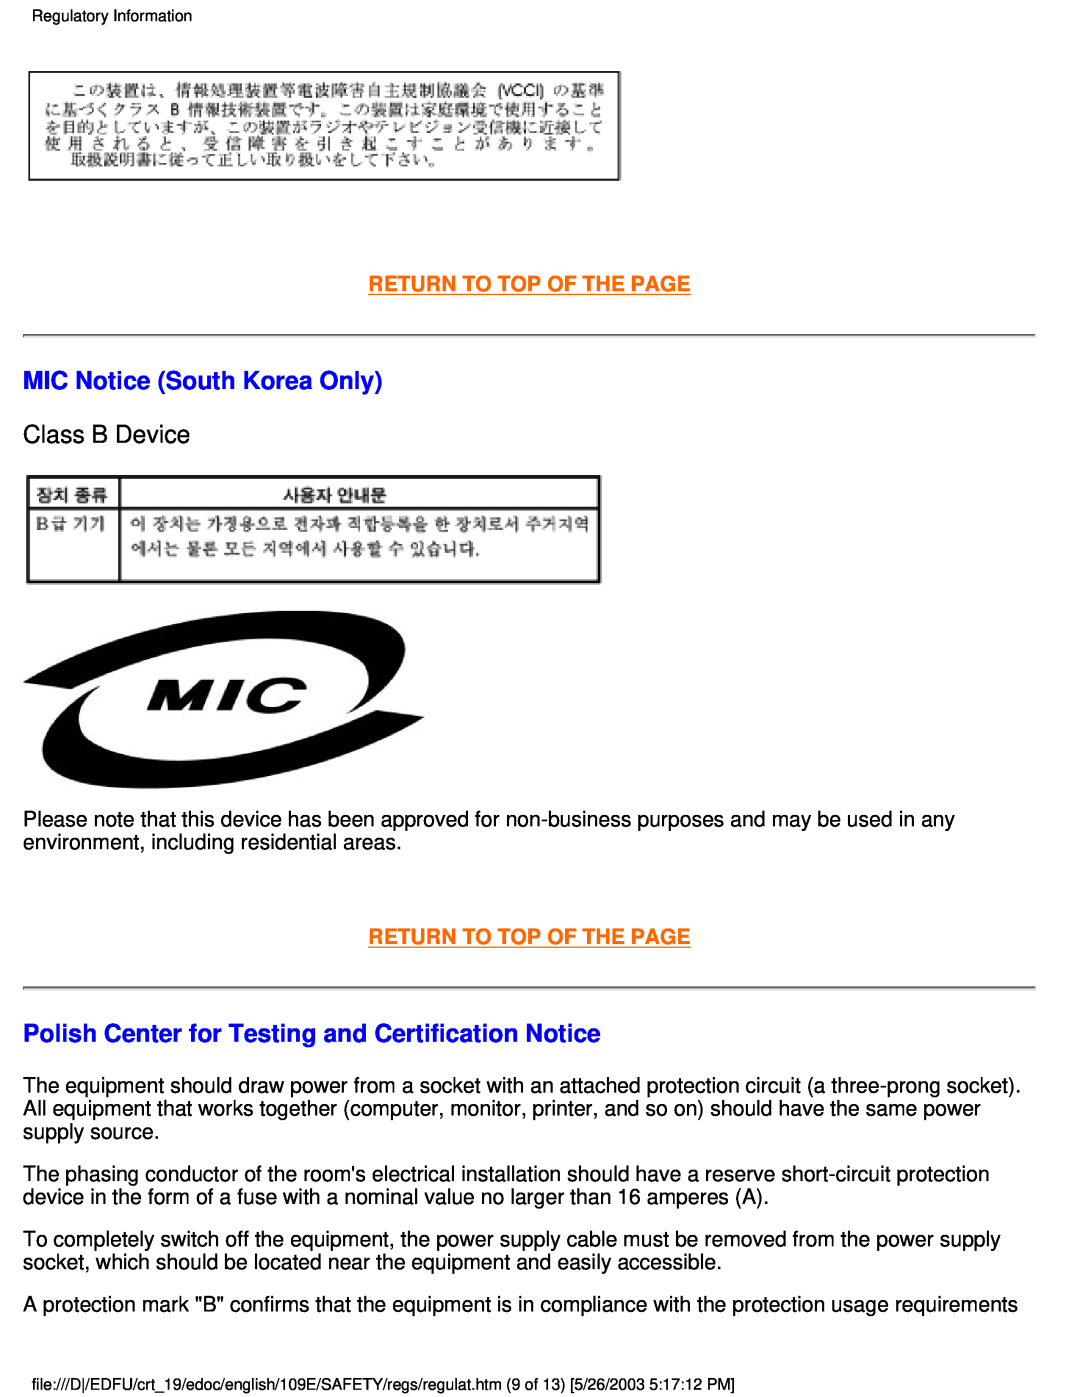 Philips 109E5 user manual MIC Notice South Korea Only, Polish Center for Testing and Certification Notice, Class B Device 